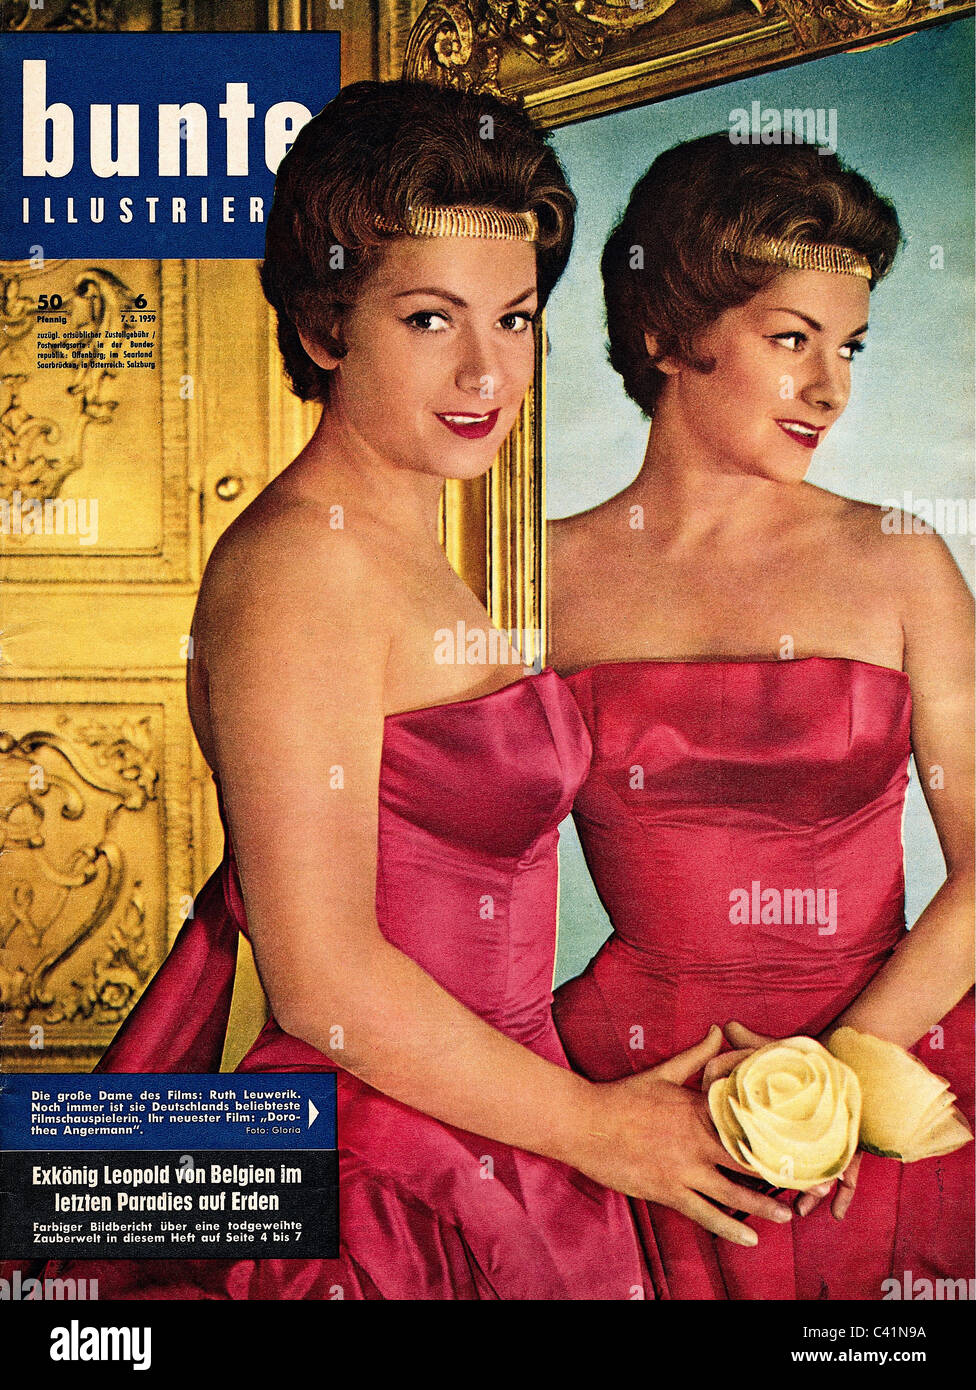 magazines, Bunte Illustrierte, No. 6, 7.2.1959, cover: Ruth Leuwerik, Additional-Rights-Clearences-Not Available Stock Photo